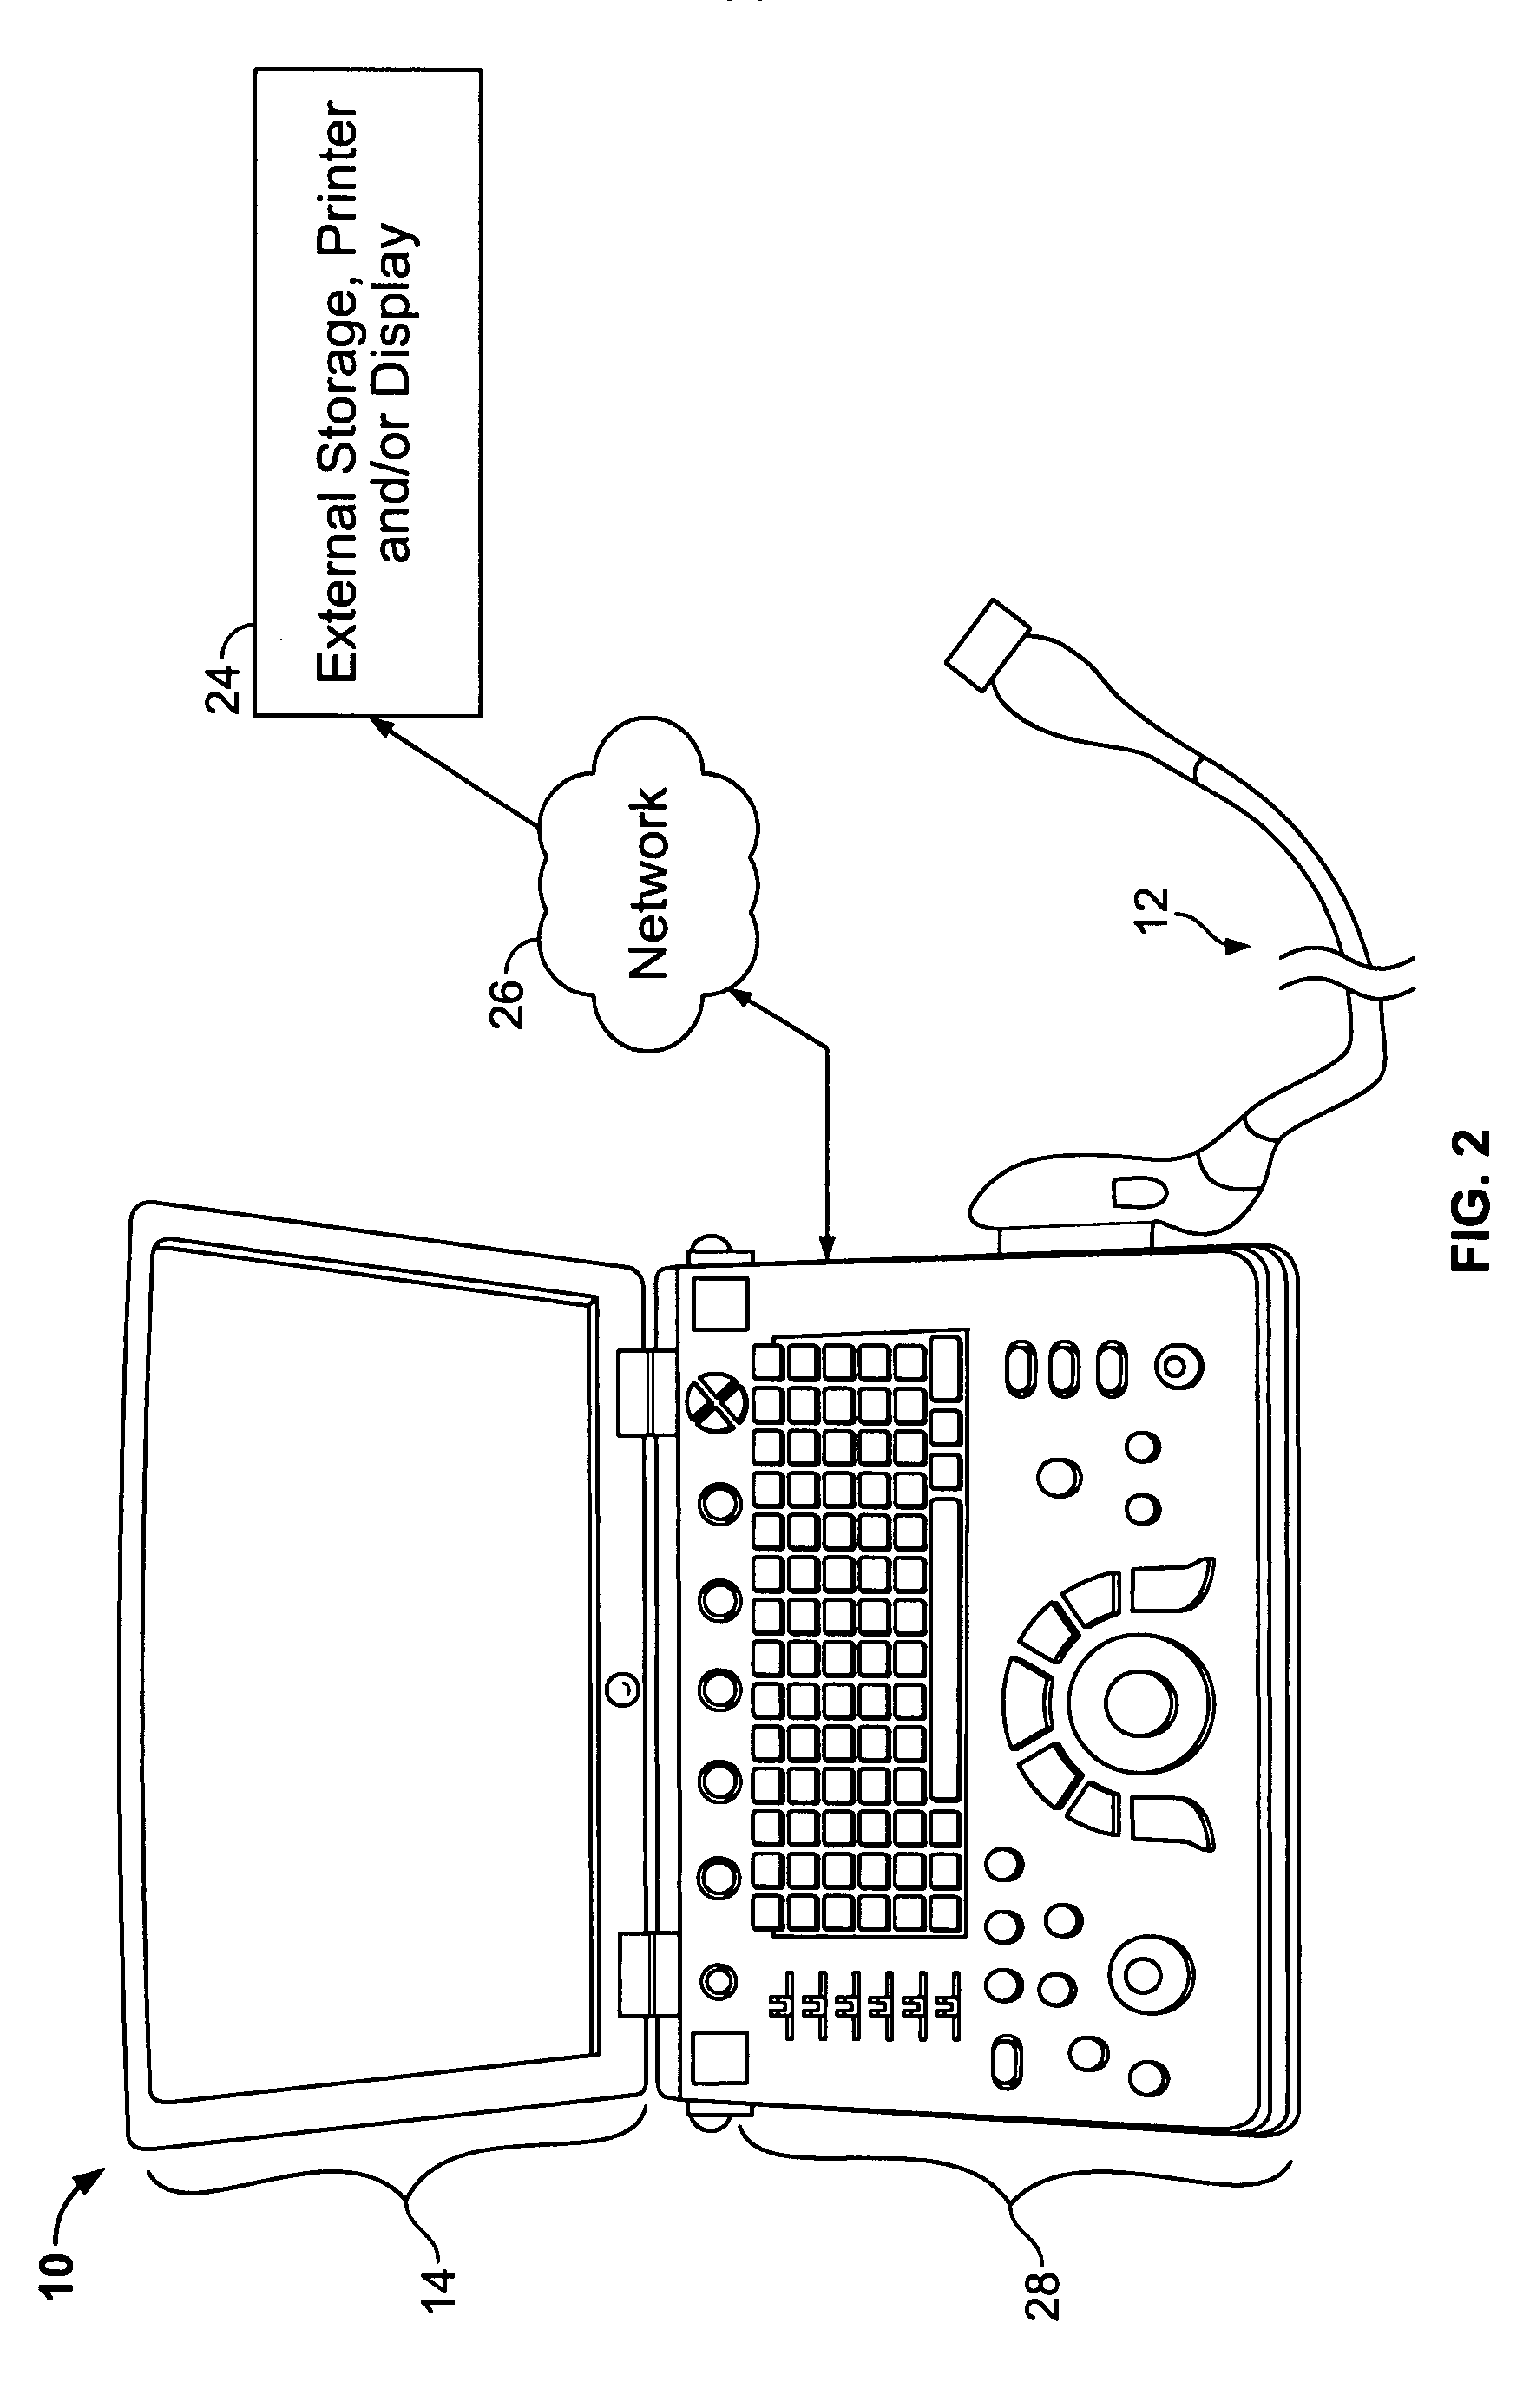 System and method for planning LV lead placement for cardiac resynchronization therapy